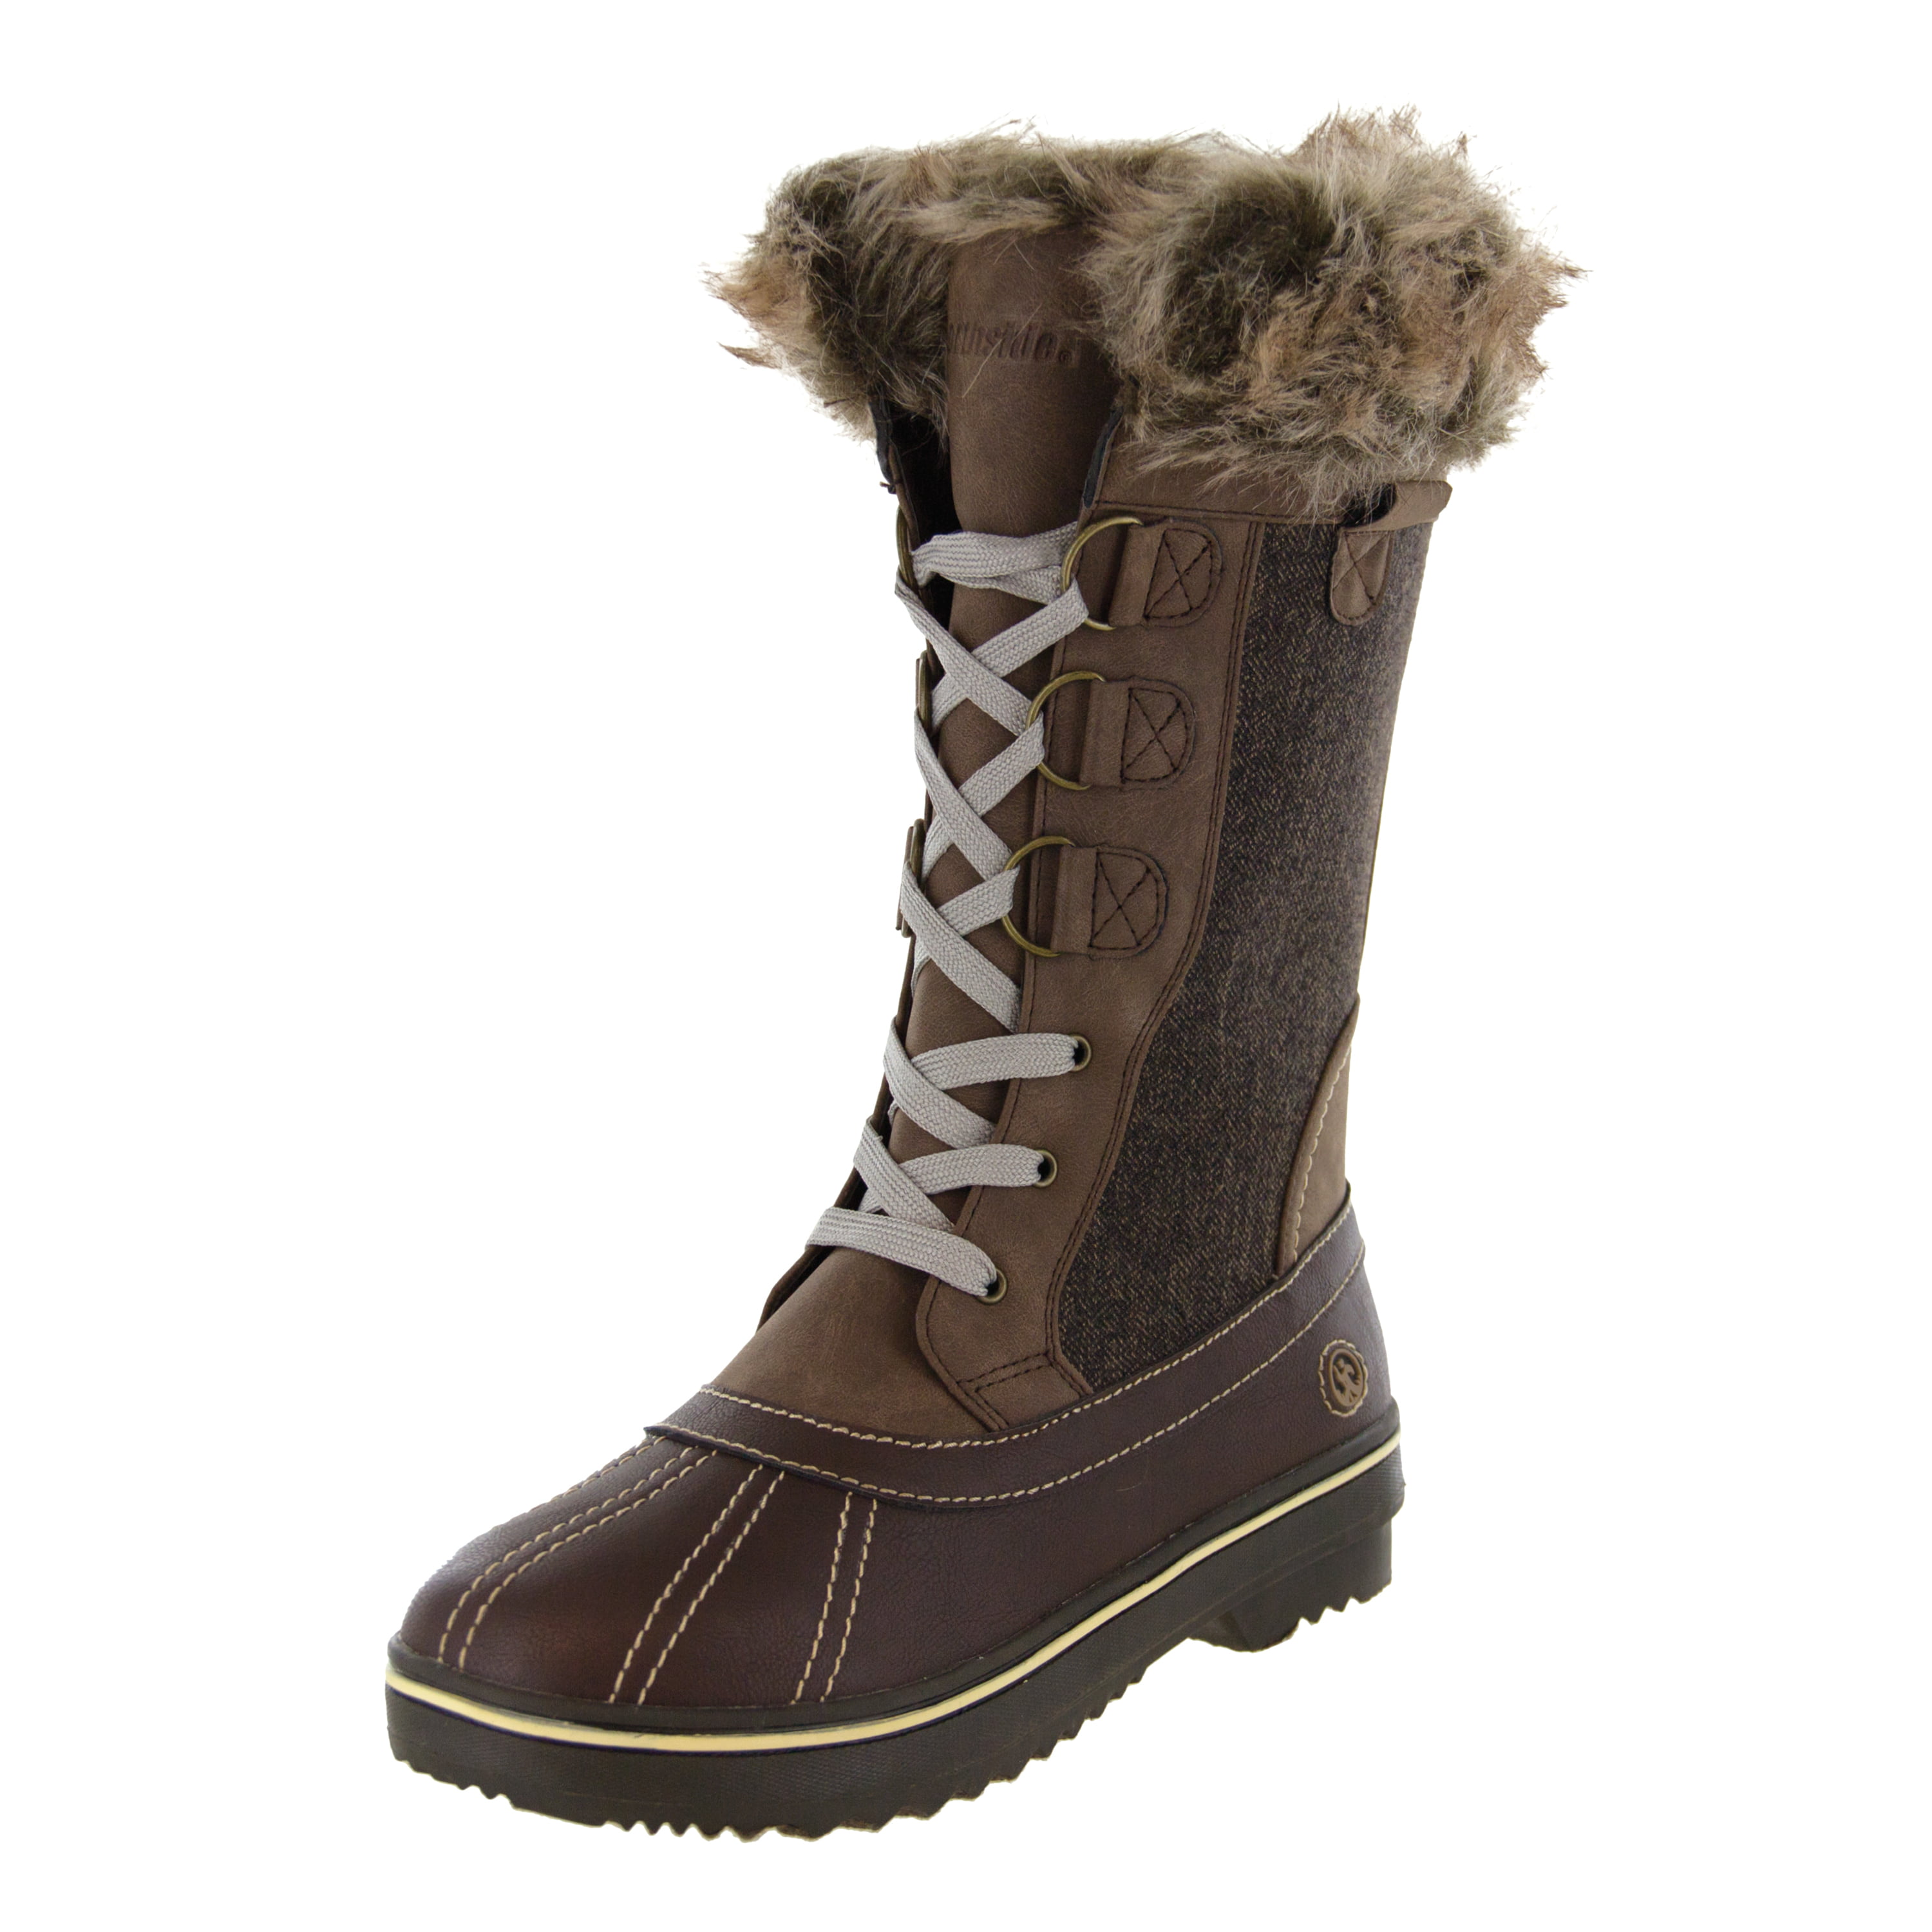 Northside Women's Bishop Fully Lined Tall Winter Boot - Walmart.com